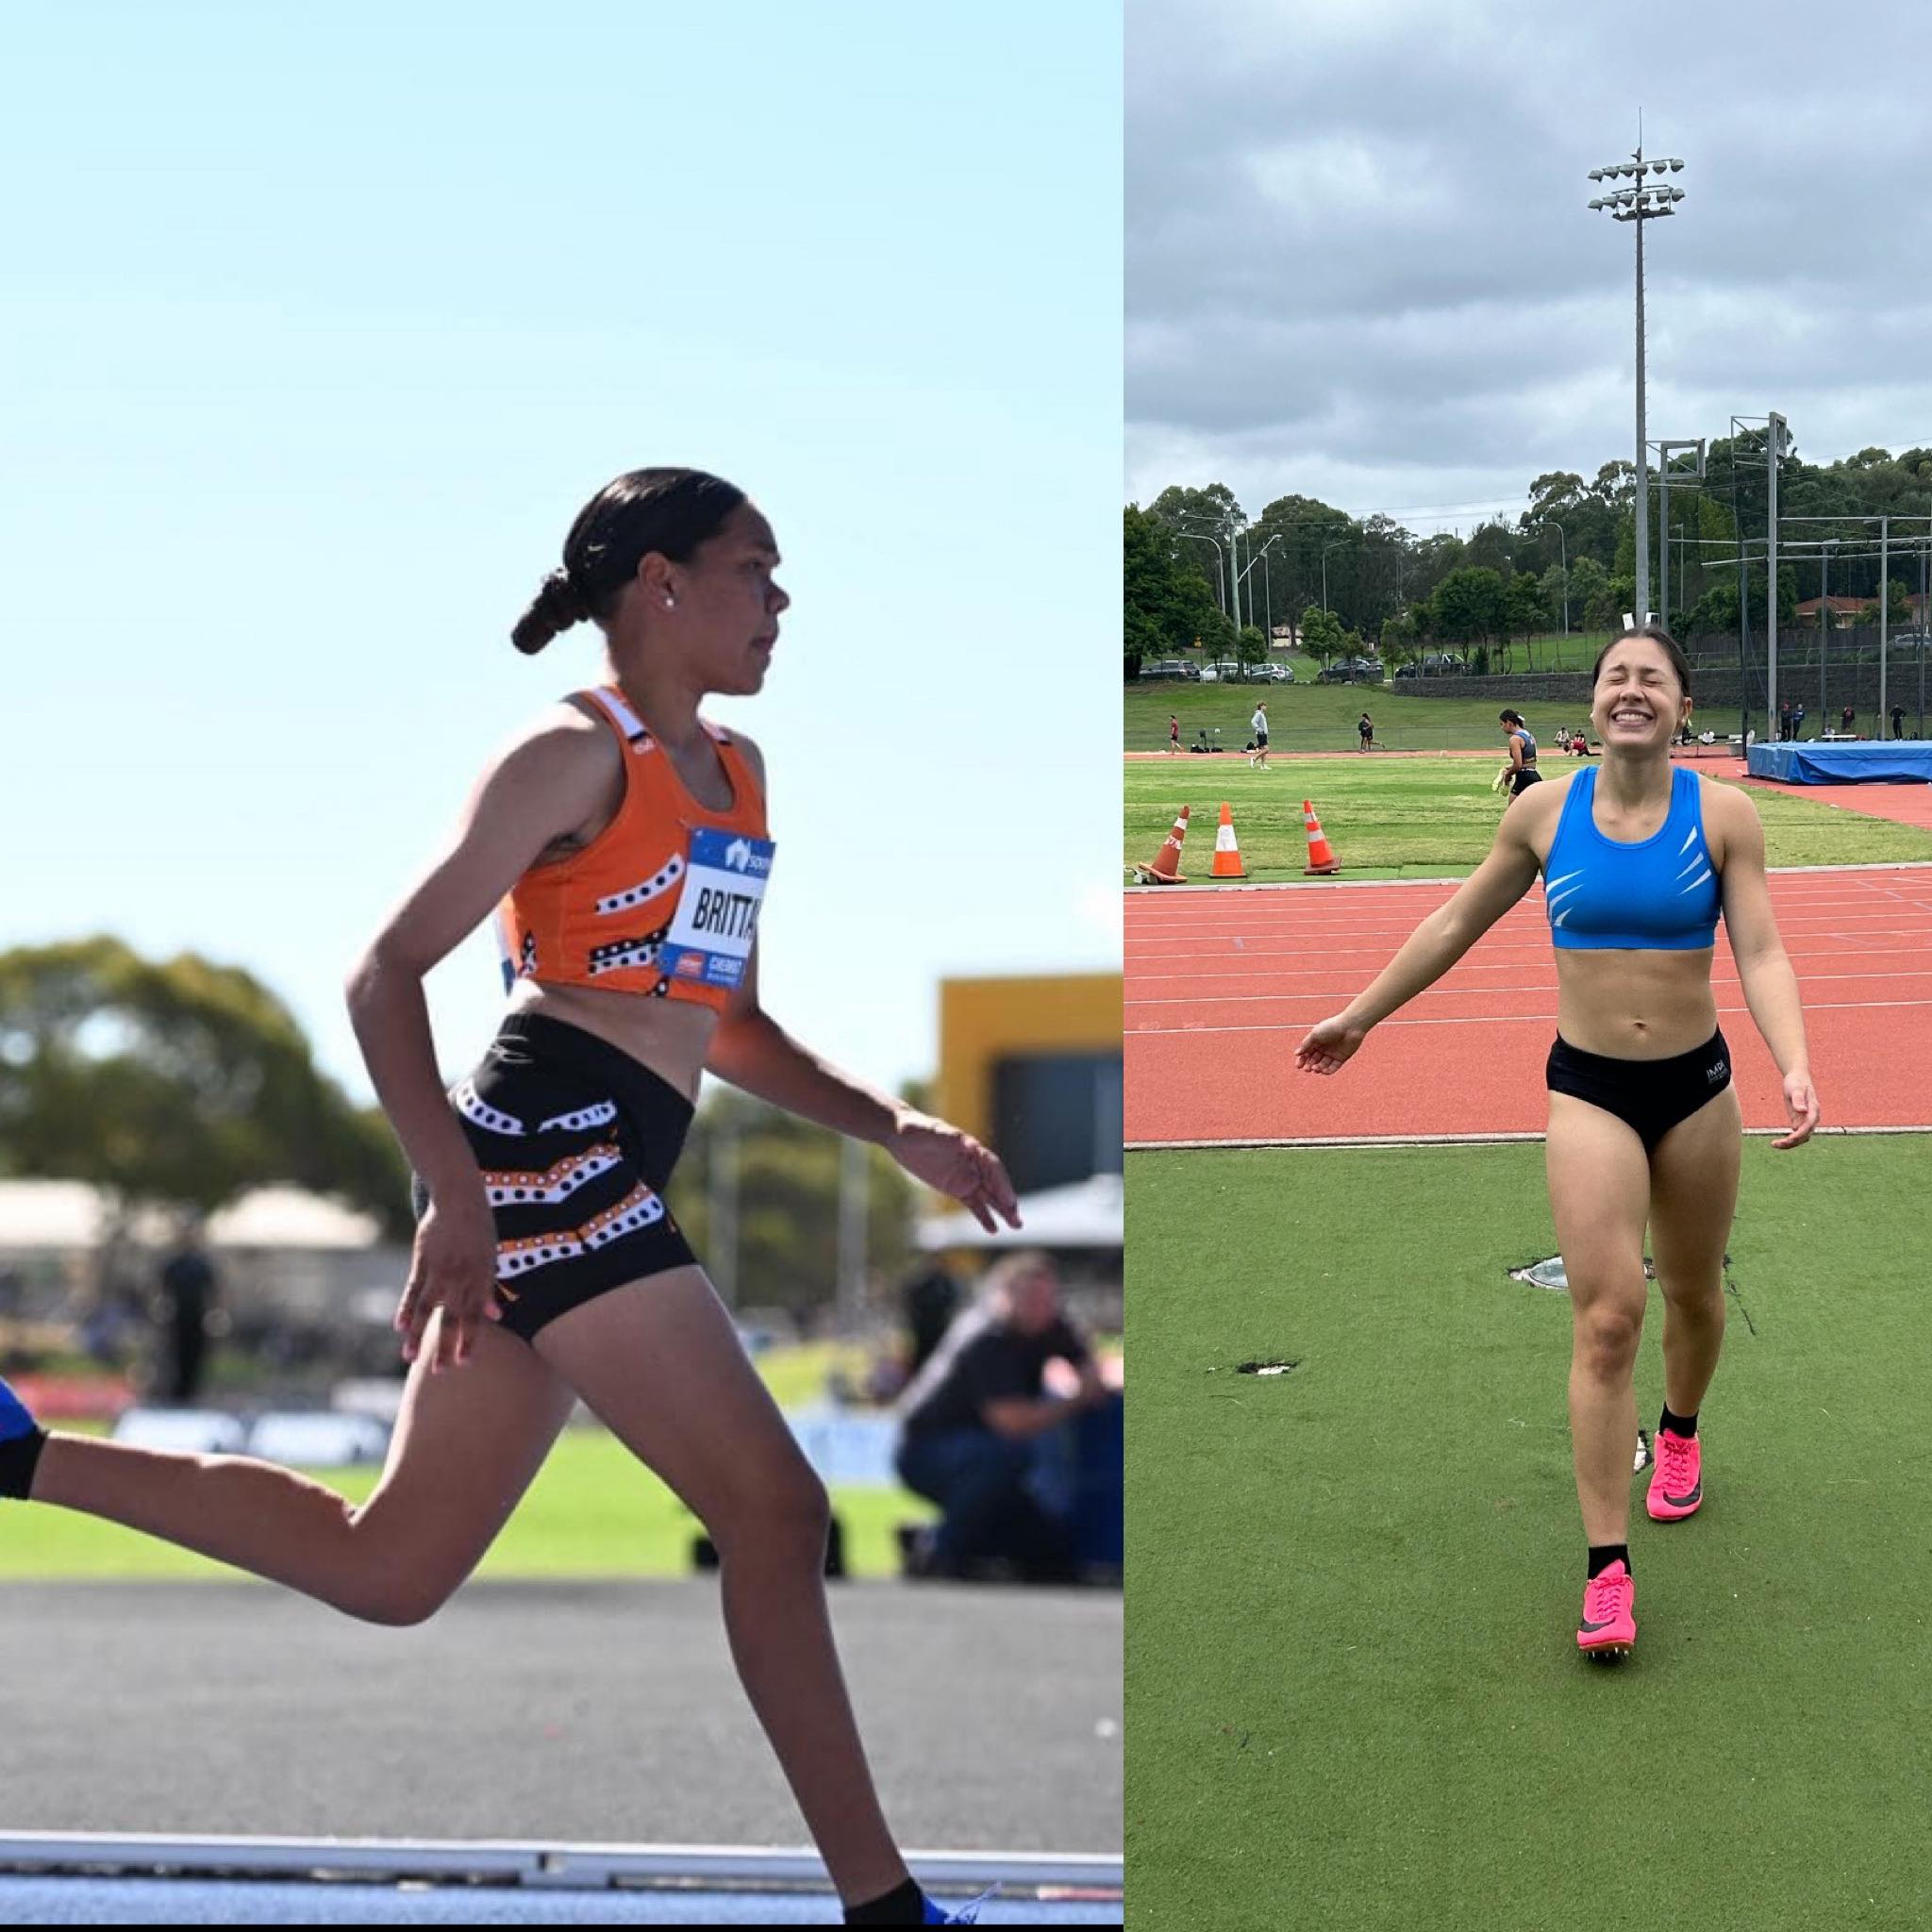 Territory athletes Aviva Damjanovic and Briseis Brittain share their remarkable achievements after competing against up-and-coming Olympians at the recent Australian Athletics Championships in Adelaide